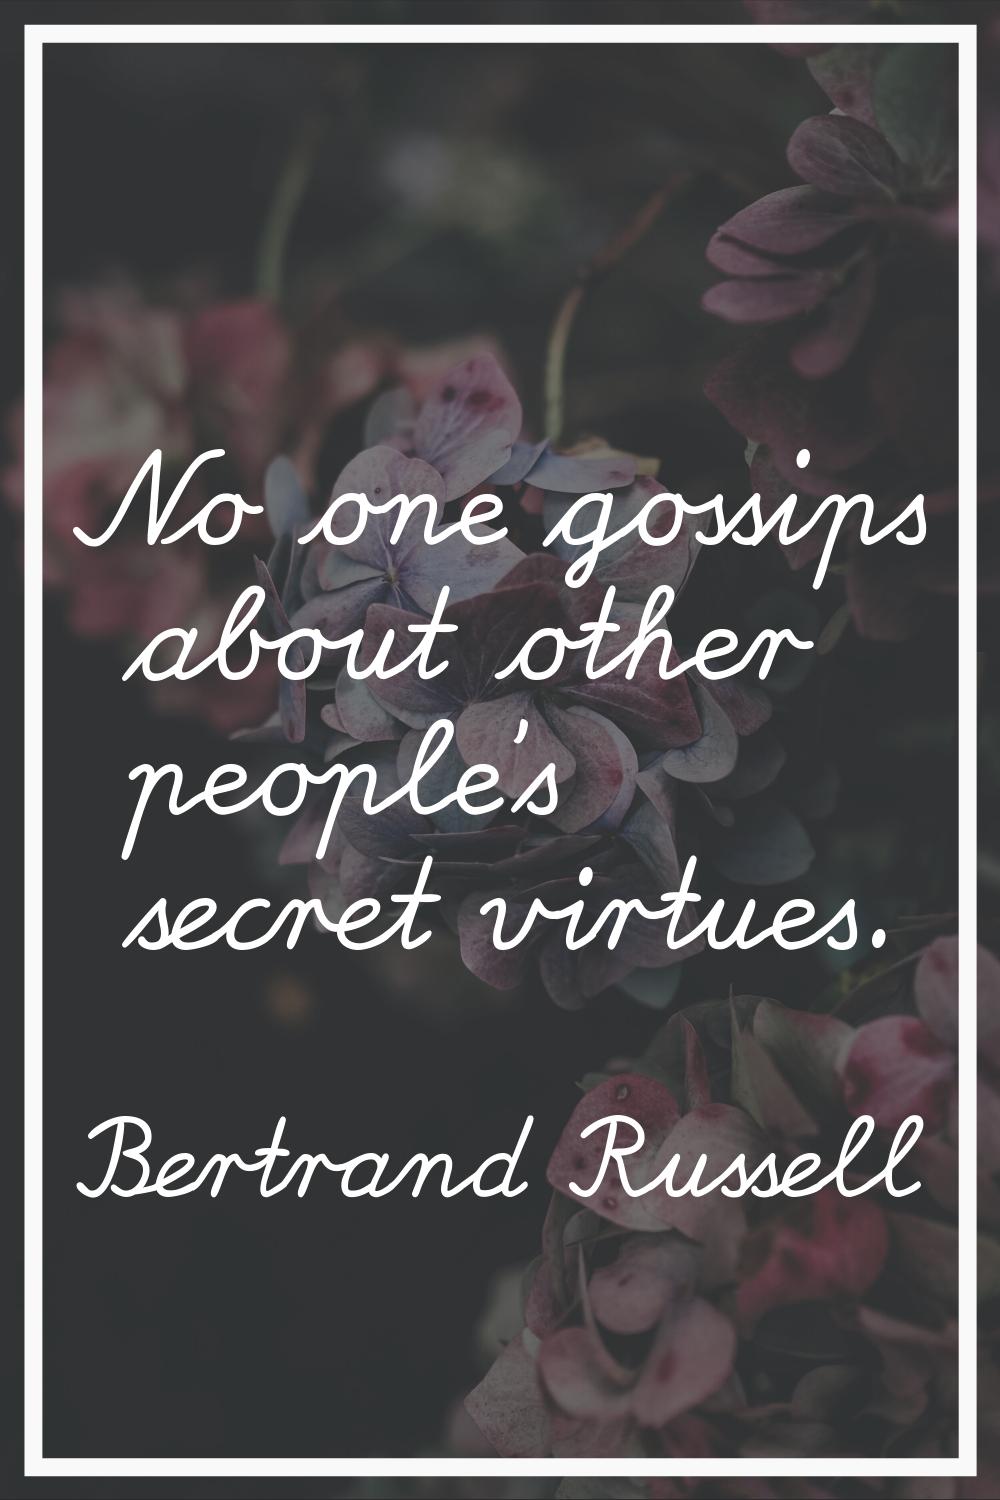 No one gossips about other people's secret virtues.